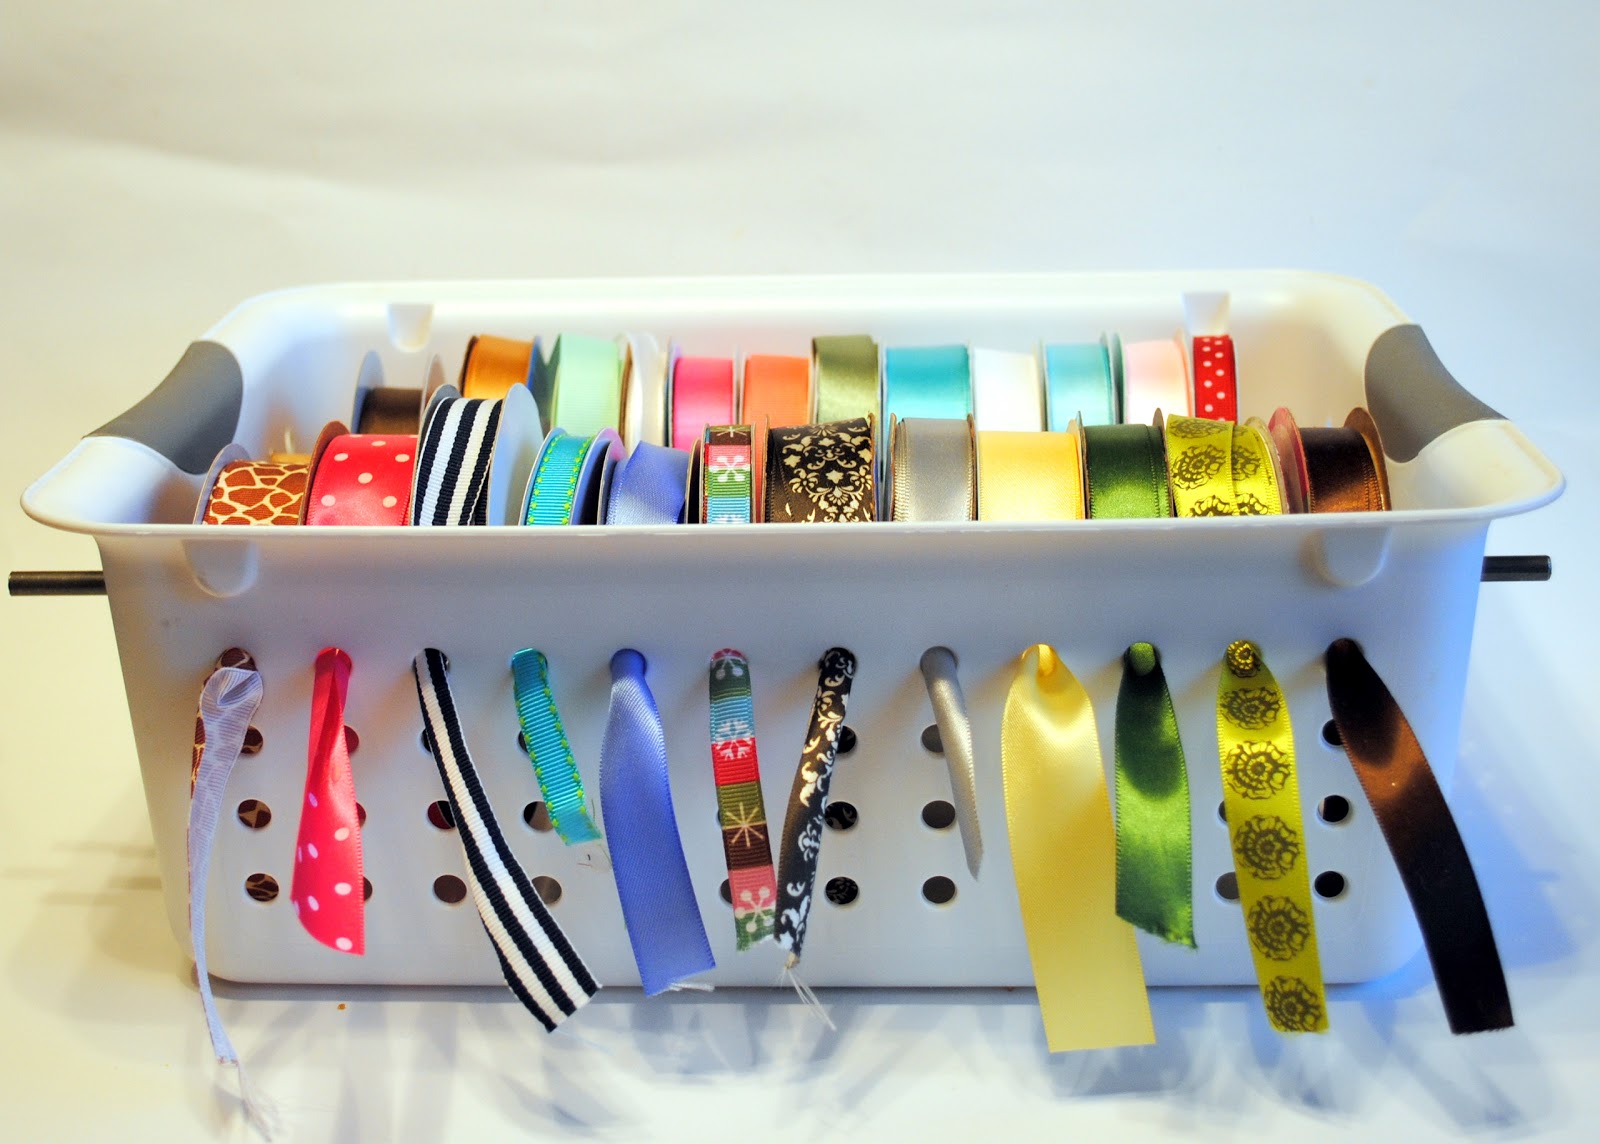 25 Brilliant DIY Jewelry Organizing and Storage Projects - Page 2